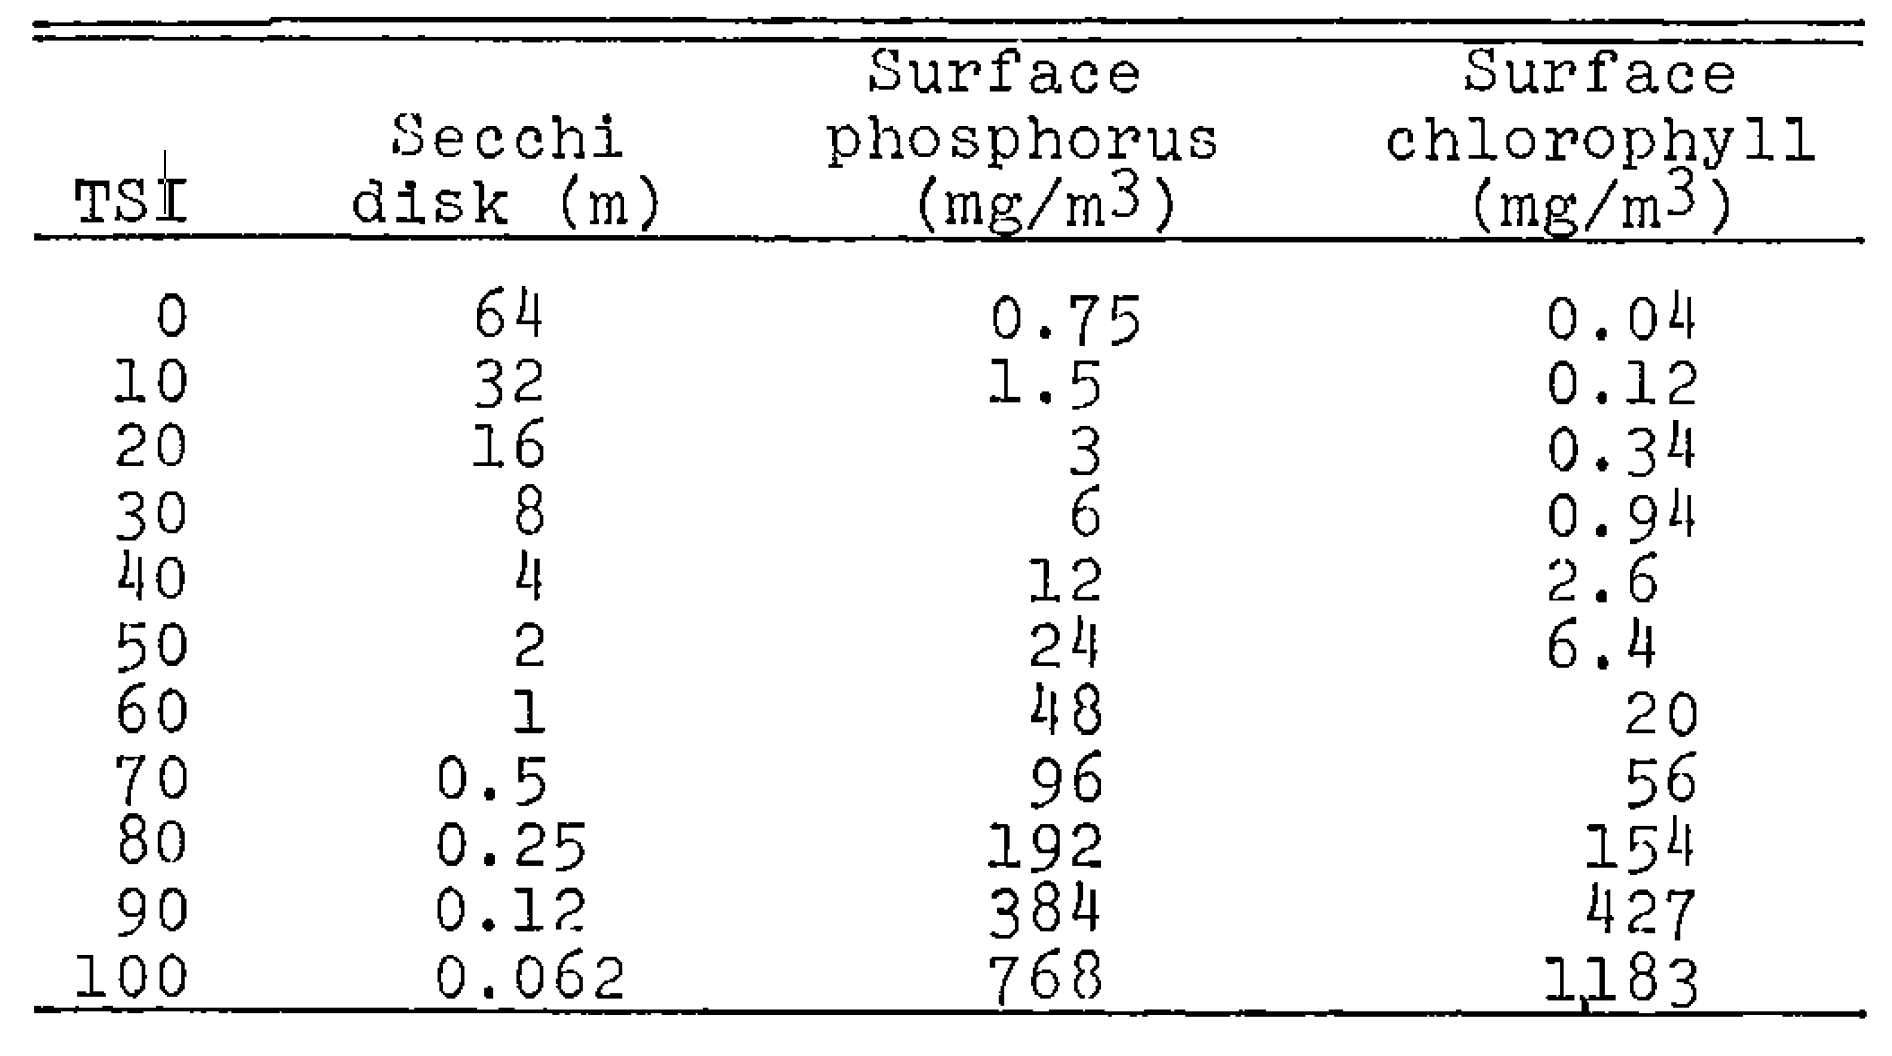 Note how phosphorous and chlorophyll concentrations increase as water clarity decreases.[@carlsonTrophicStateIndex1977]